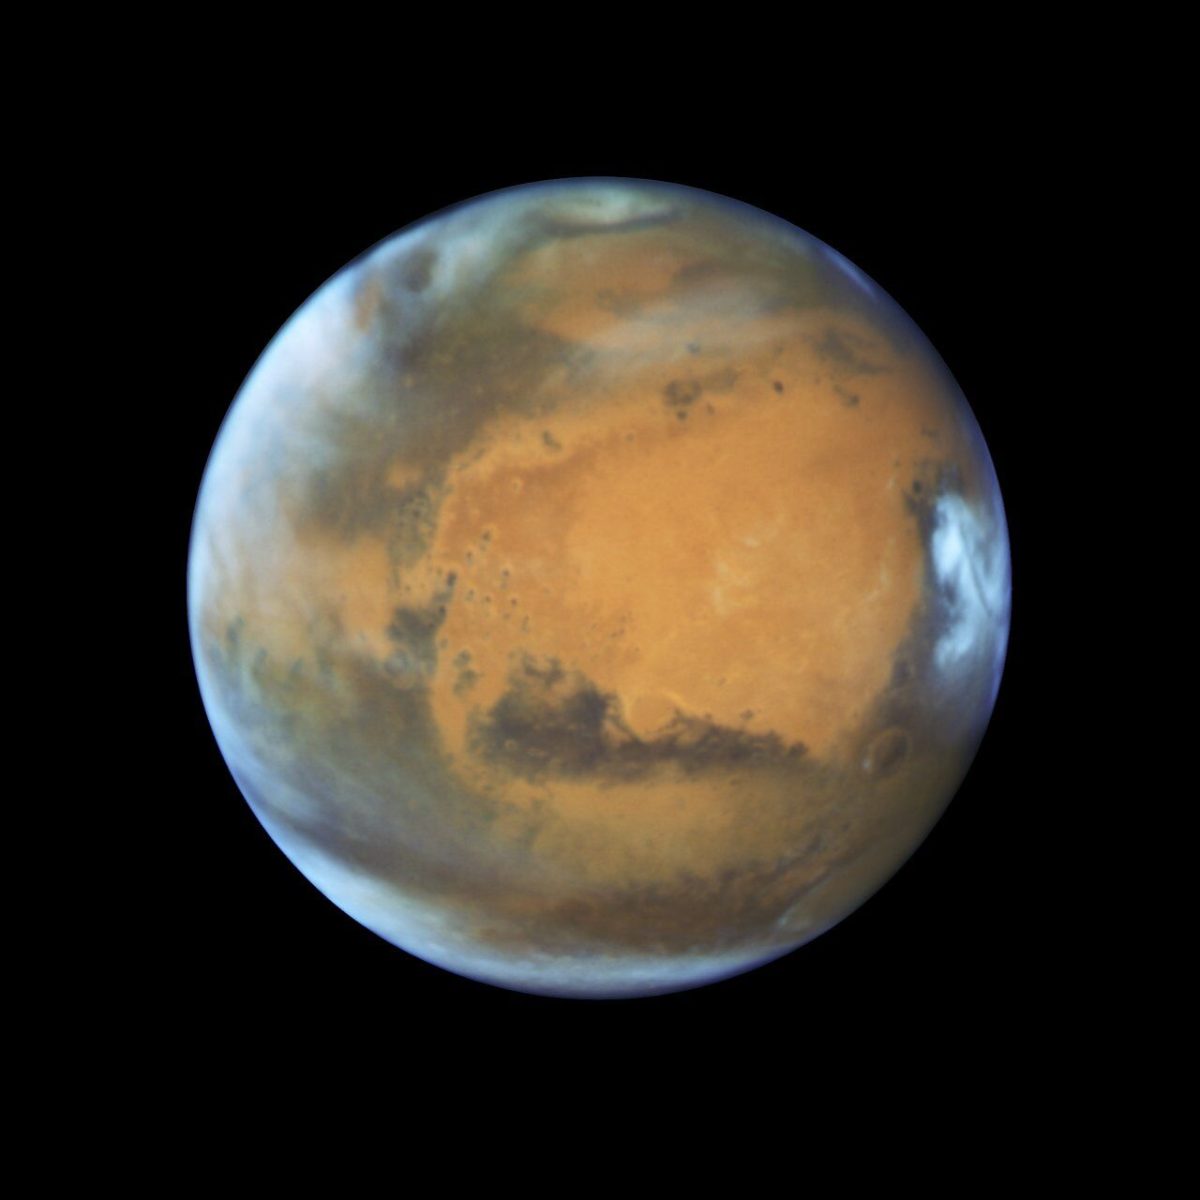 This image shows our neighbouring planet Mars, as it was observed shortly before opposition in 2016 by the NASA/ESA Hubble Space Telescope. Some prominent features of the planet are clearly visible: the ancient and inactive shield volcano Syrtis Major; the bright and oval Hellas Planitia basin; the heavily eroded Arabia Terra in the centre of the image; the dark features of Sinus Sabaeous and Sinus Meridiani along the equator; and the small southern polar cap.